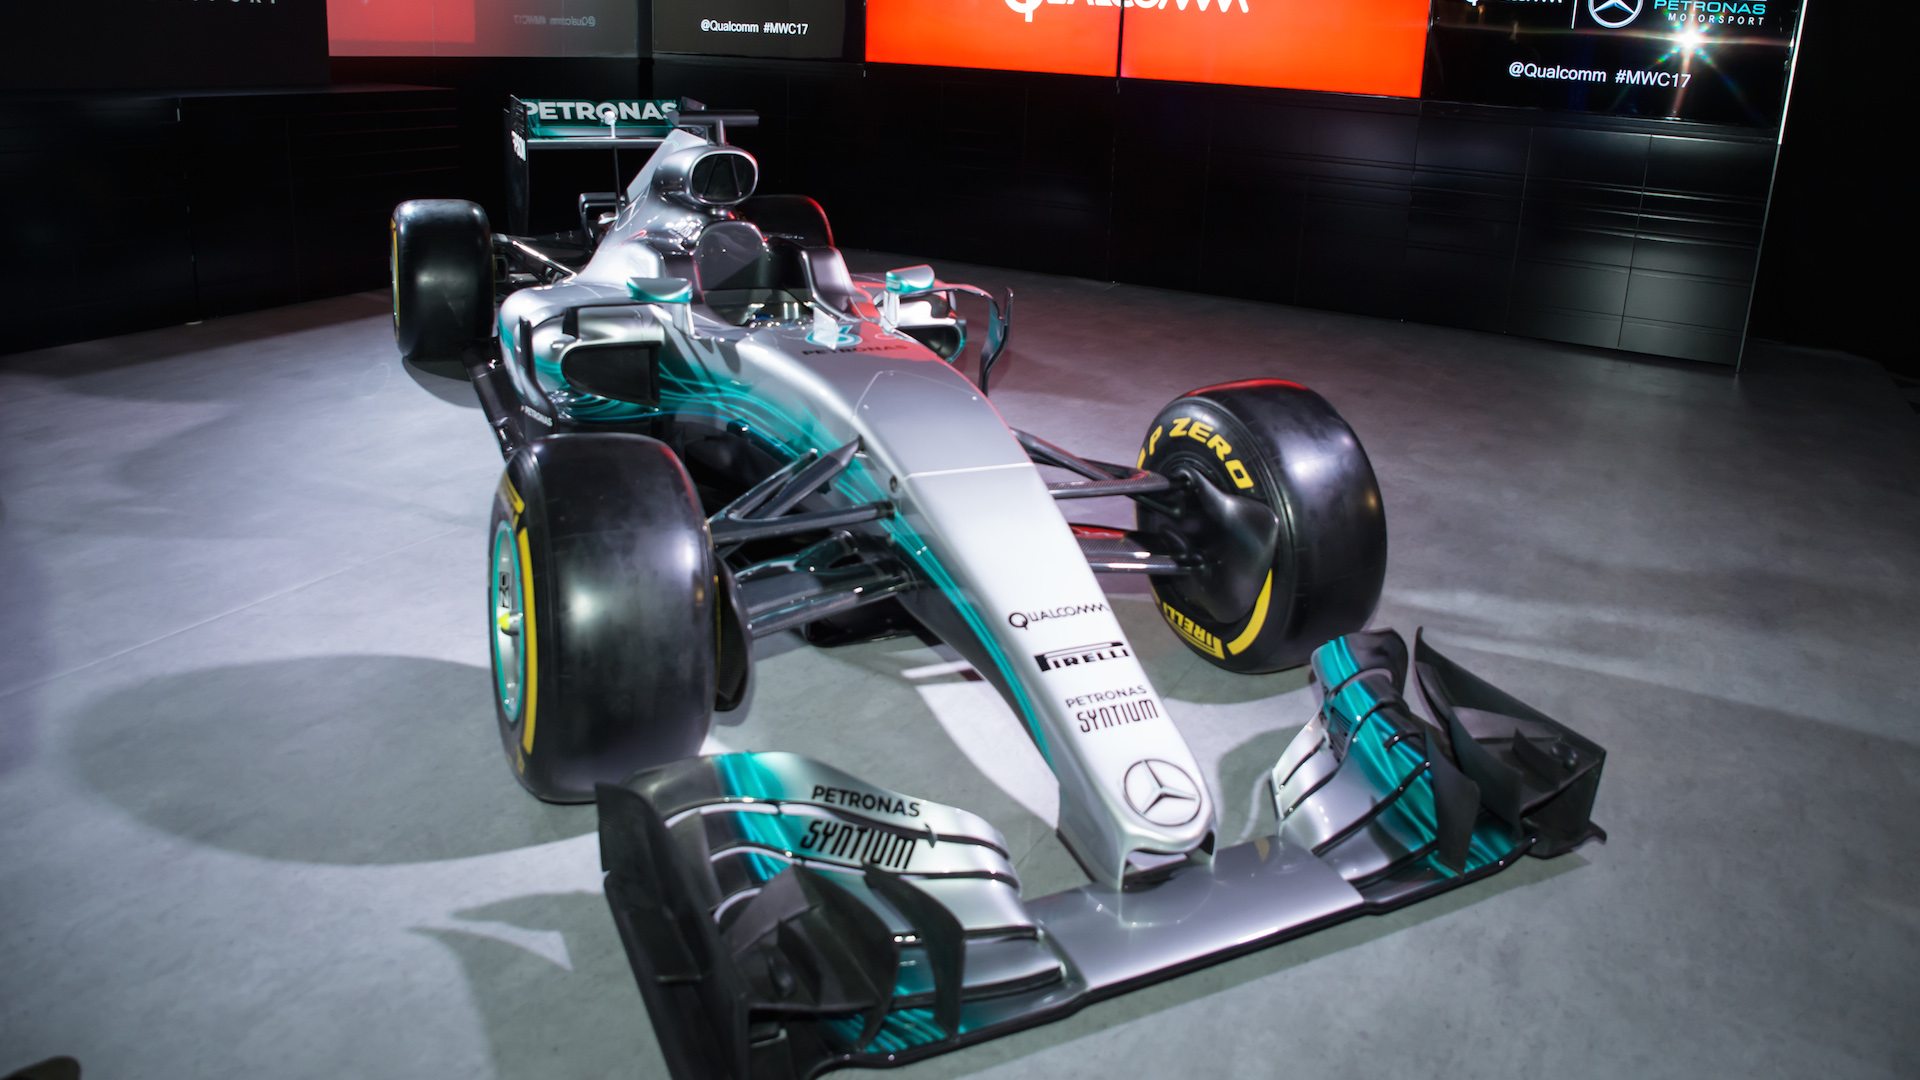 How a smartphone giant is changing the face of Formula 1 TechRadar